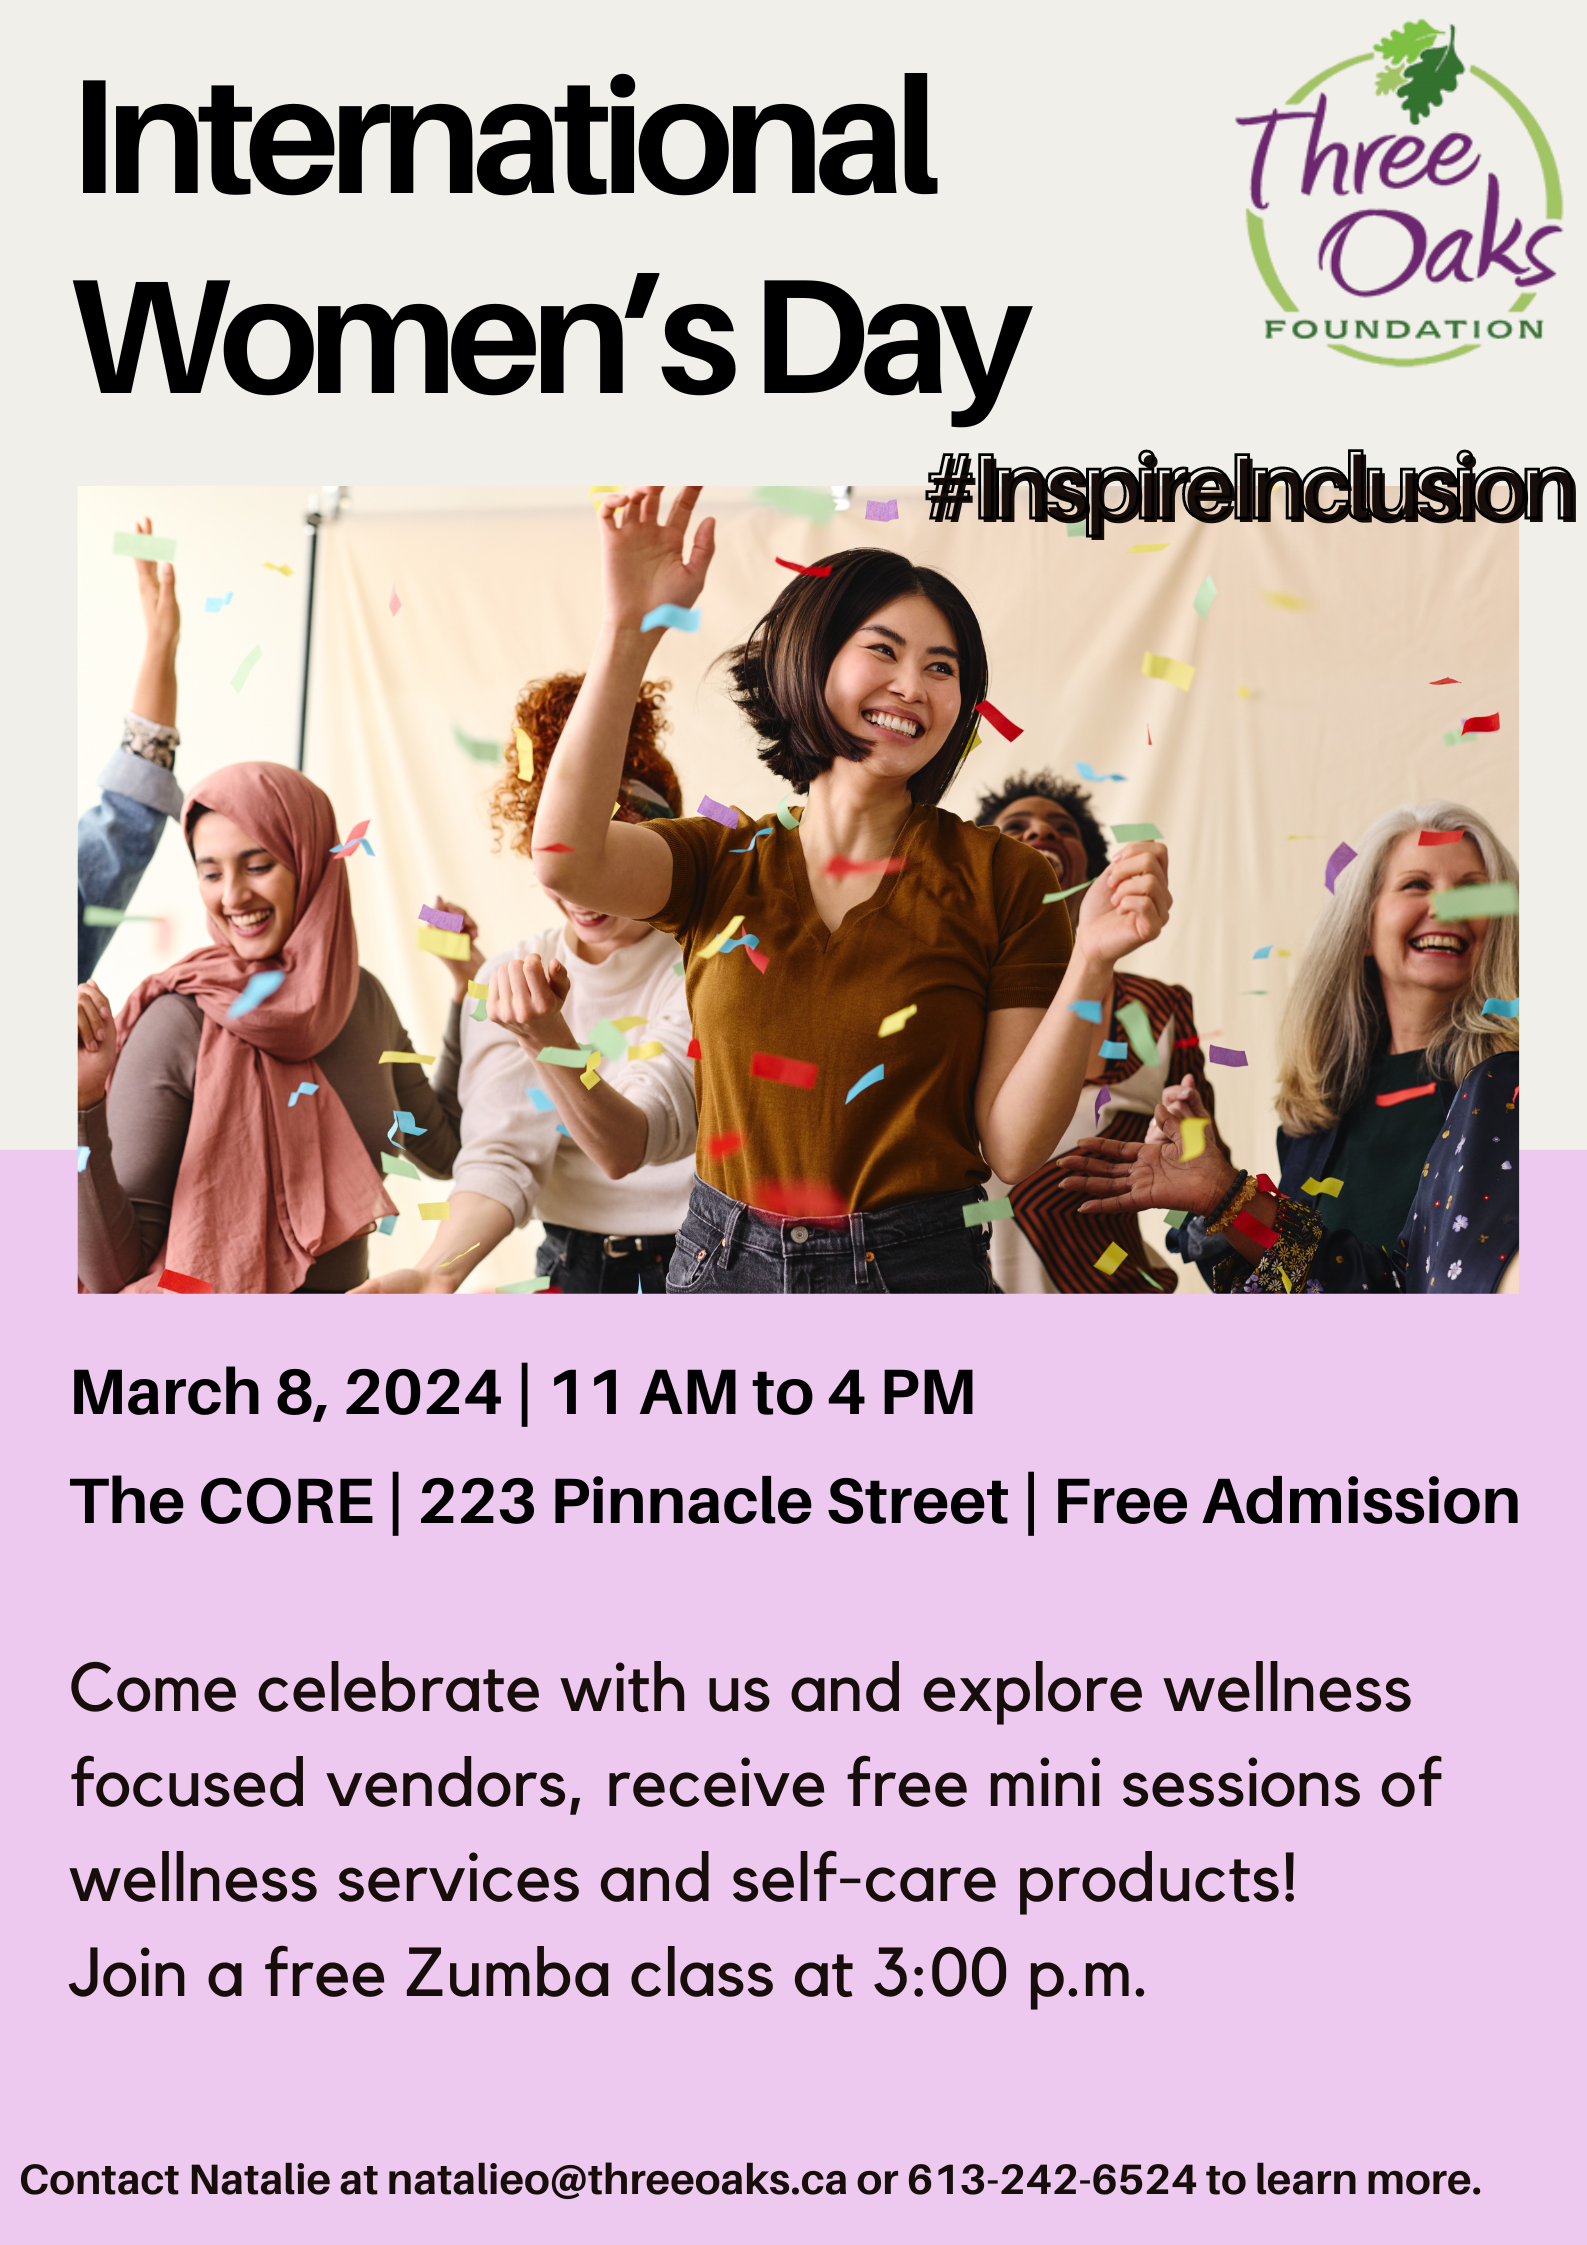 event poster titled "International Women's Day"